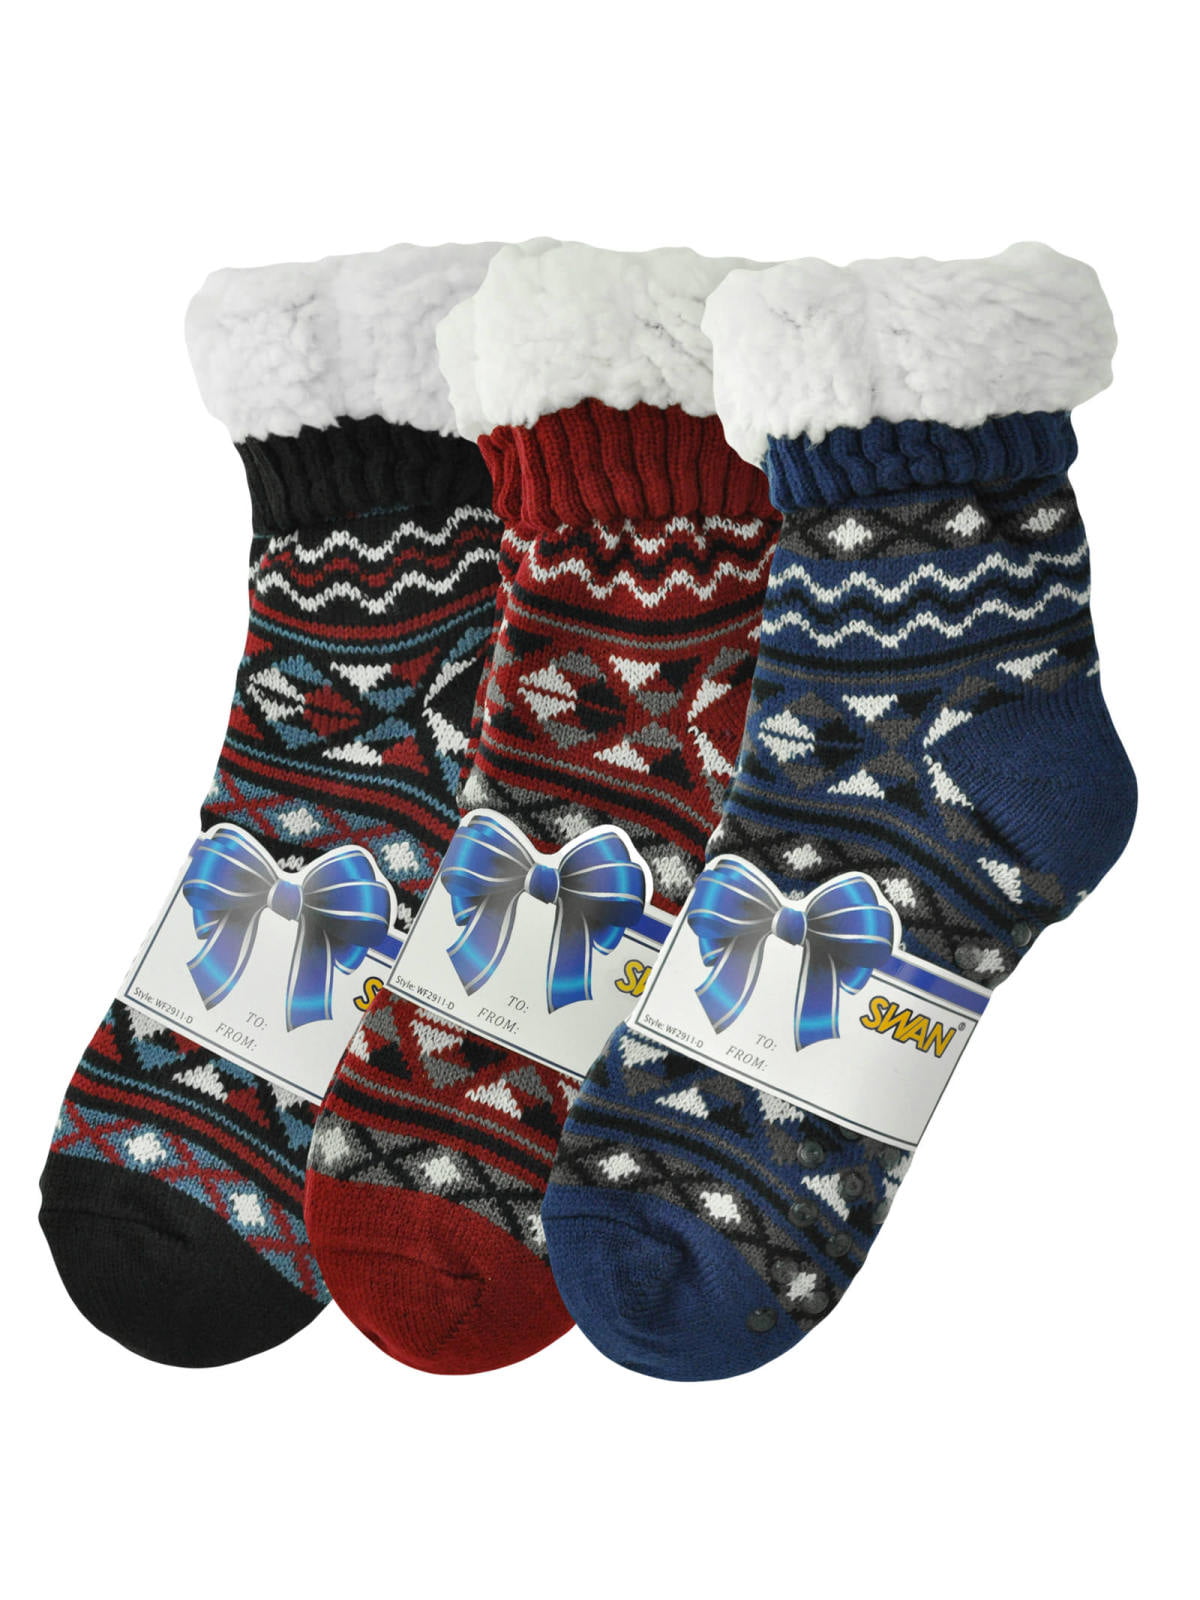 Men 4Pairs Solid Thick Wool Winter Warm Crew Slipper Home Socks Forthery Socks 